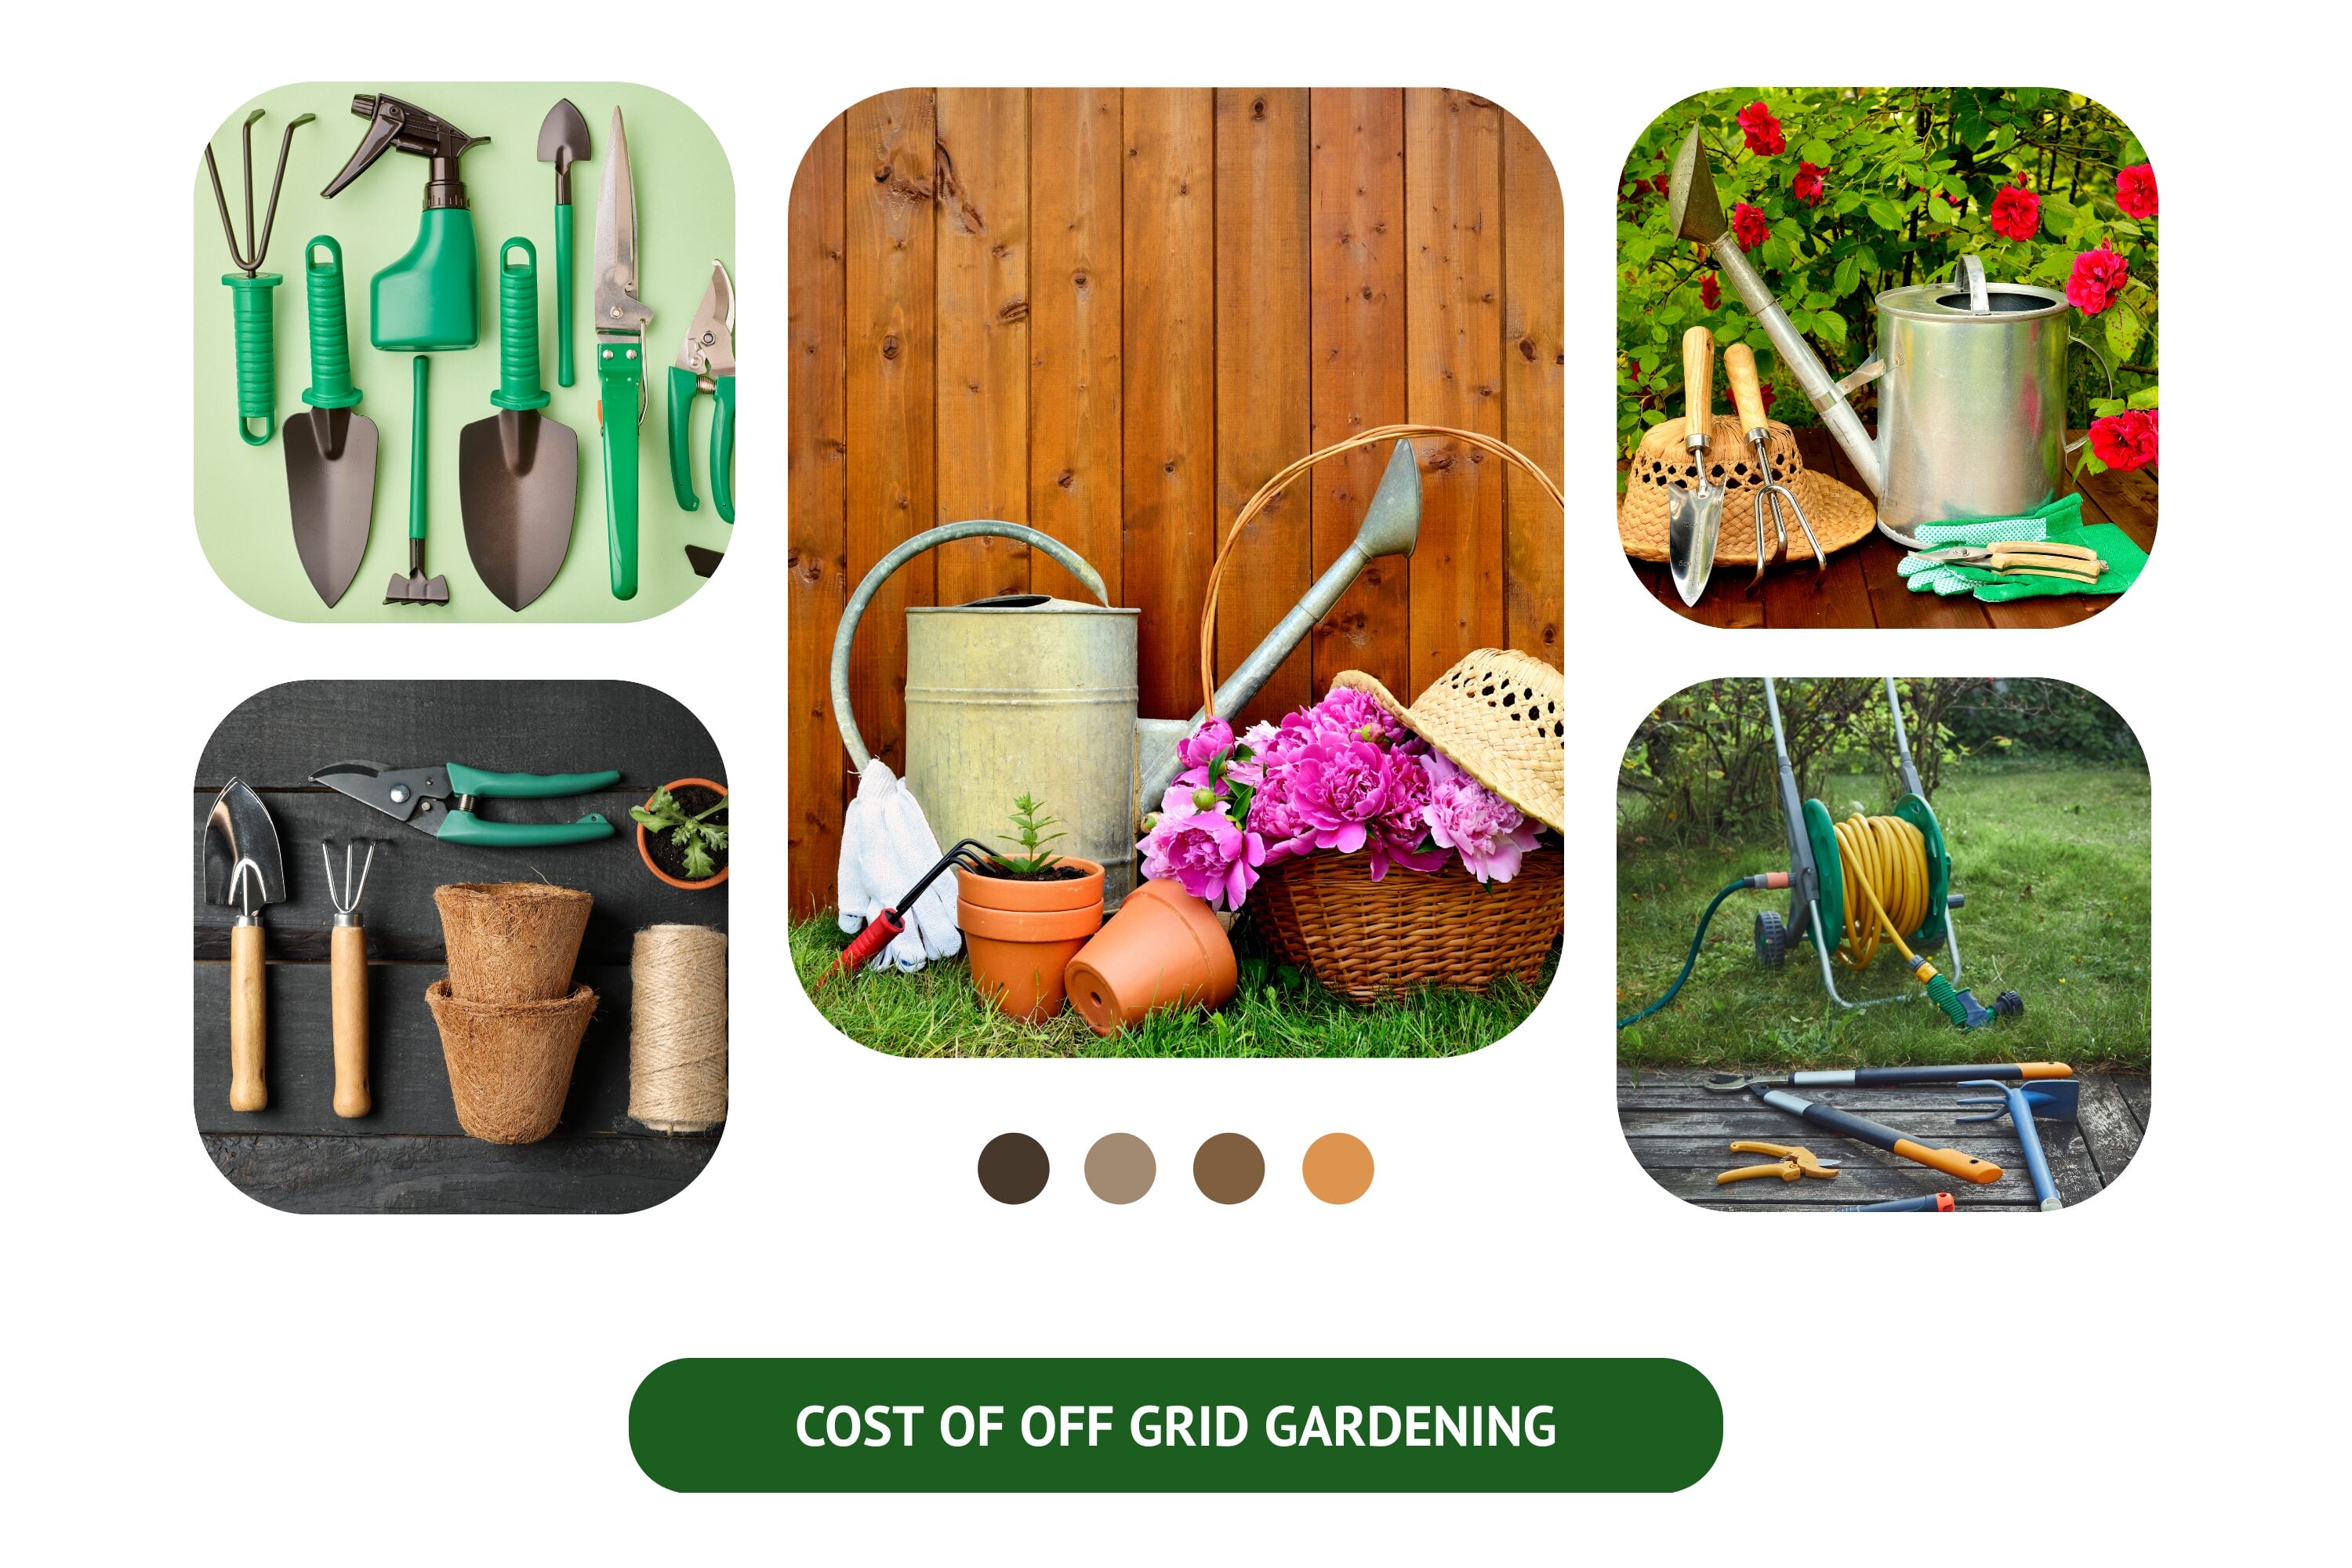 The expenses involved in off-grid gardening.